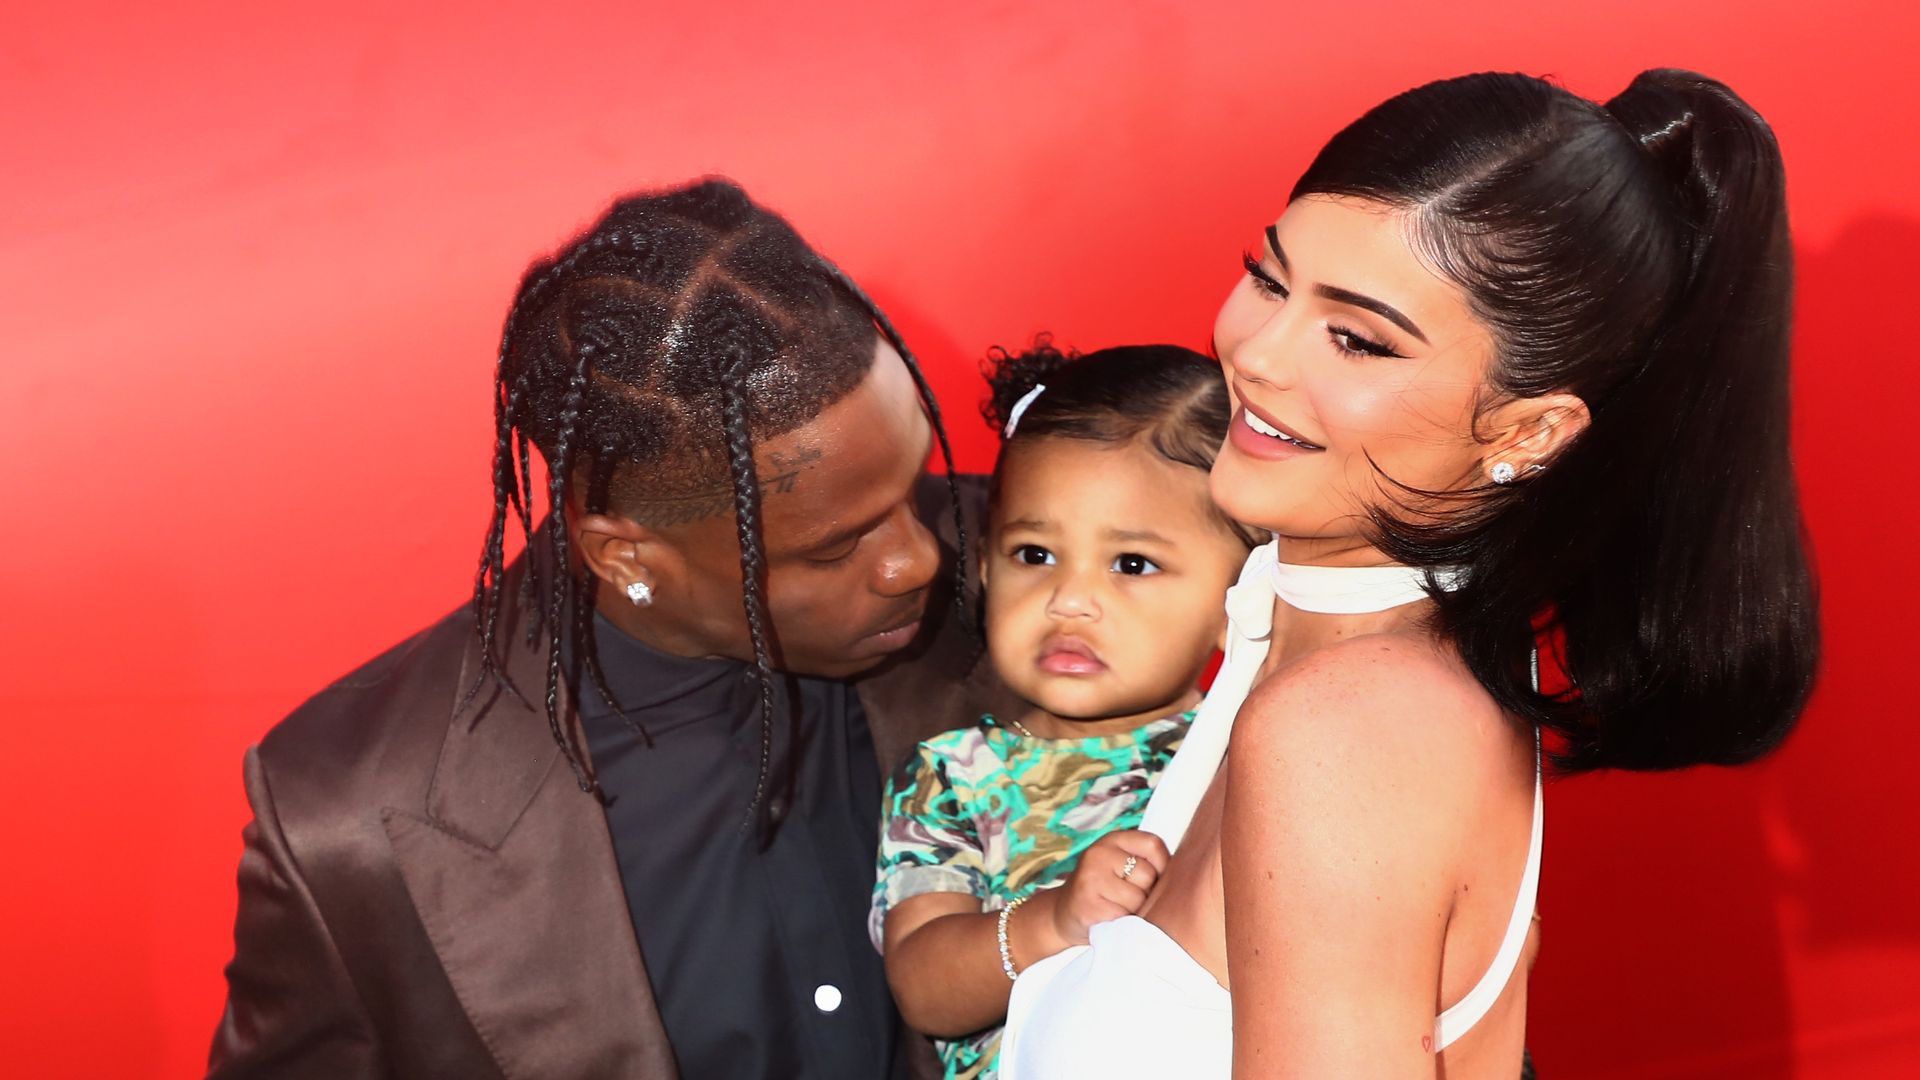 Travis Scott and Kylie Jenner attend the Travis Scott: "Look Mom I Can Fly" Los Angeles Premiere at The Barker Hanger on August 27, 2019 in Santa Monica, California